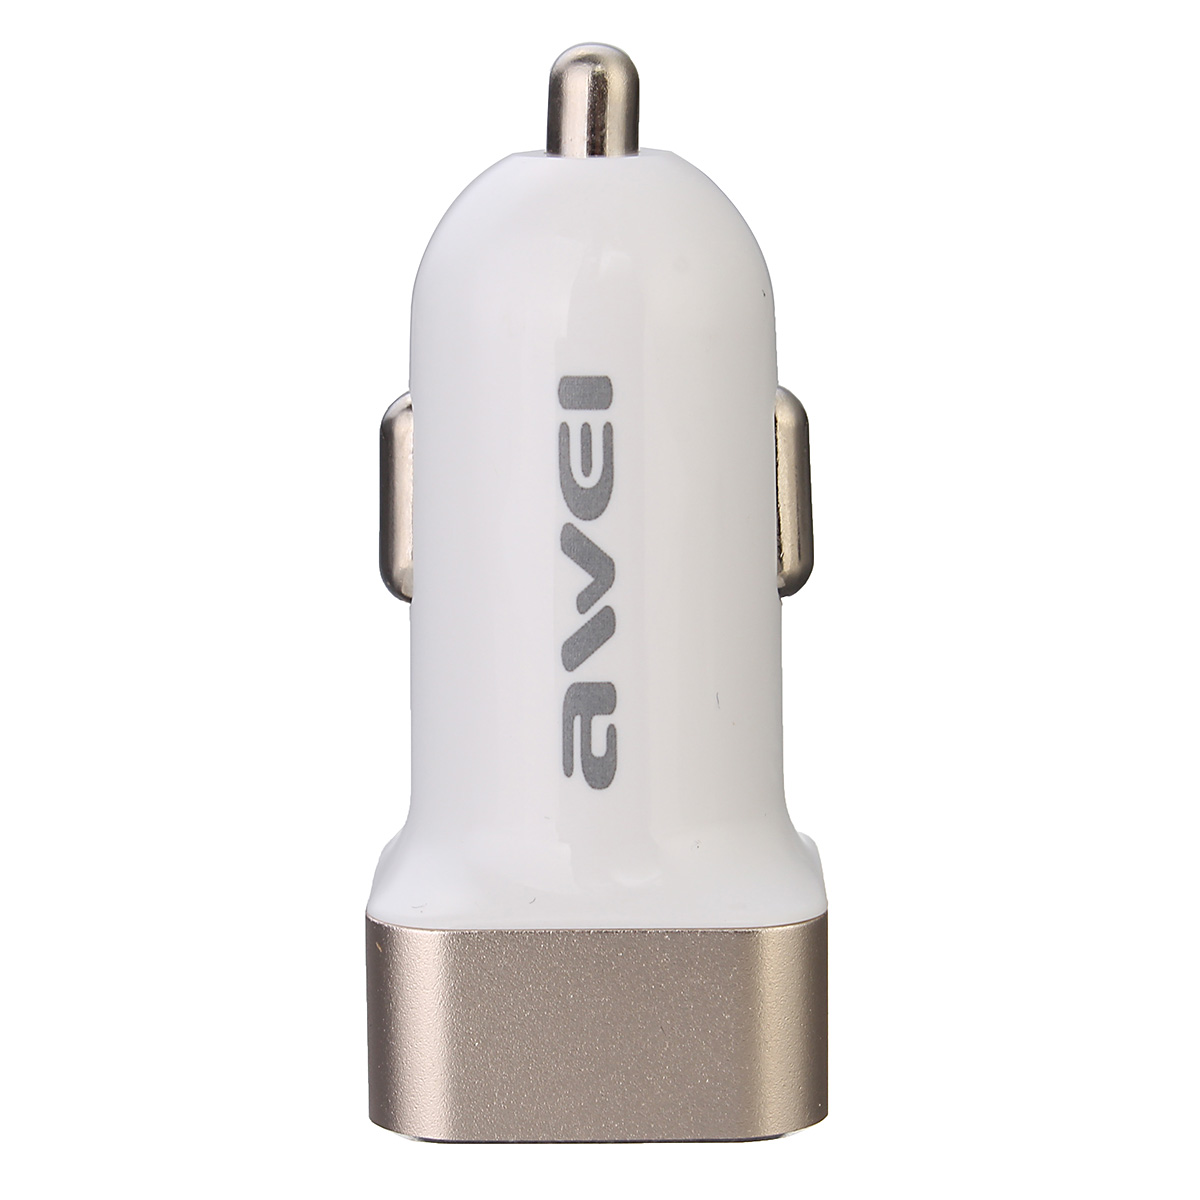 Aweireg-Metal-Dual-USB-Quick-Car-Charger-5V-24A-For-iPhone-SE6S6S-Plus66-PlusGalaxy-S7-Ipad-1112918